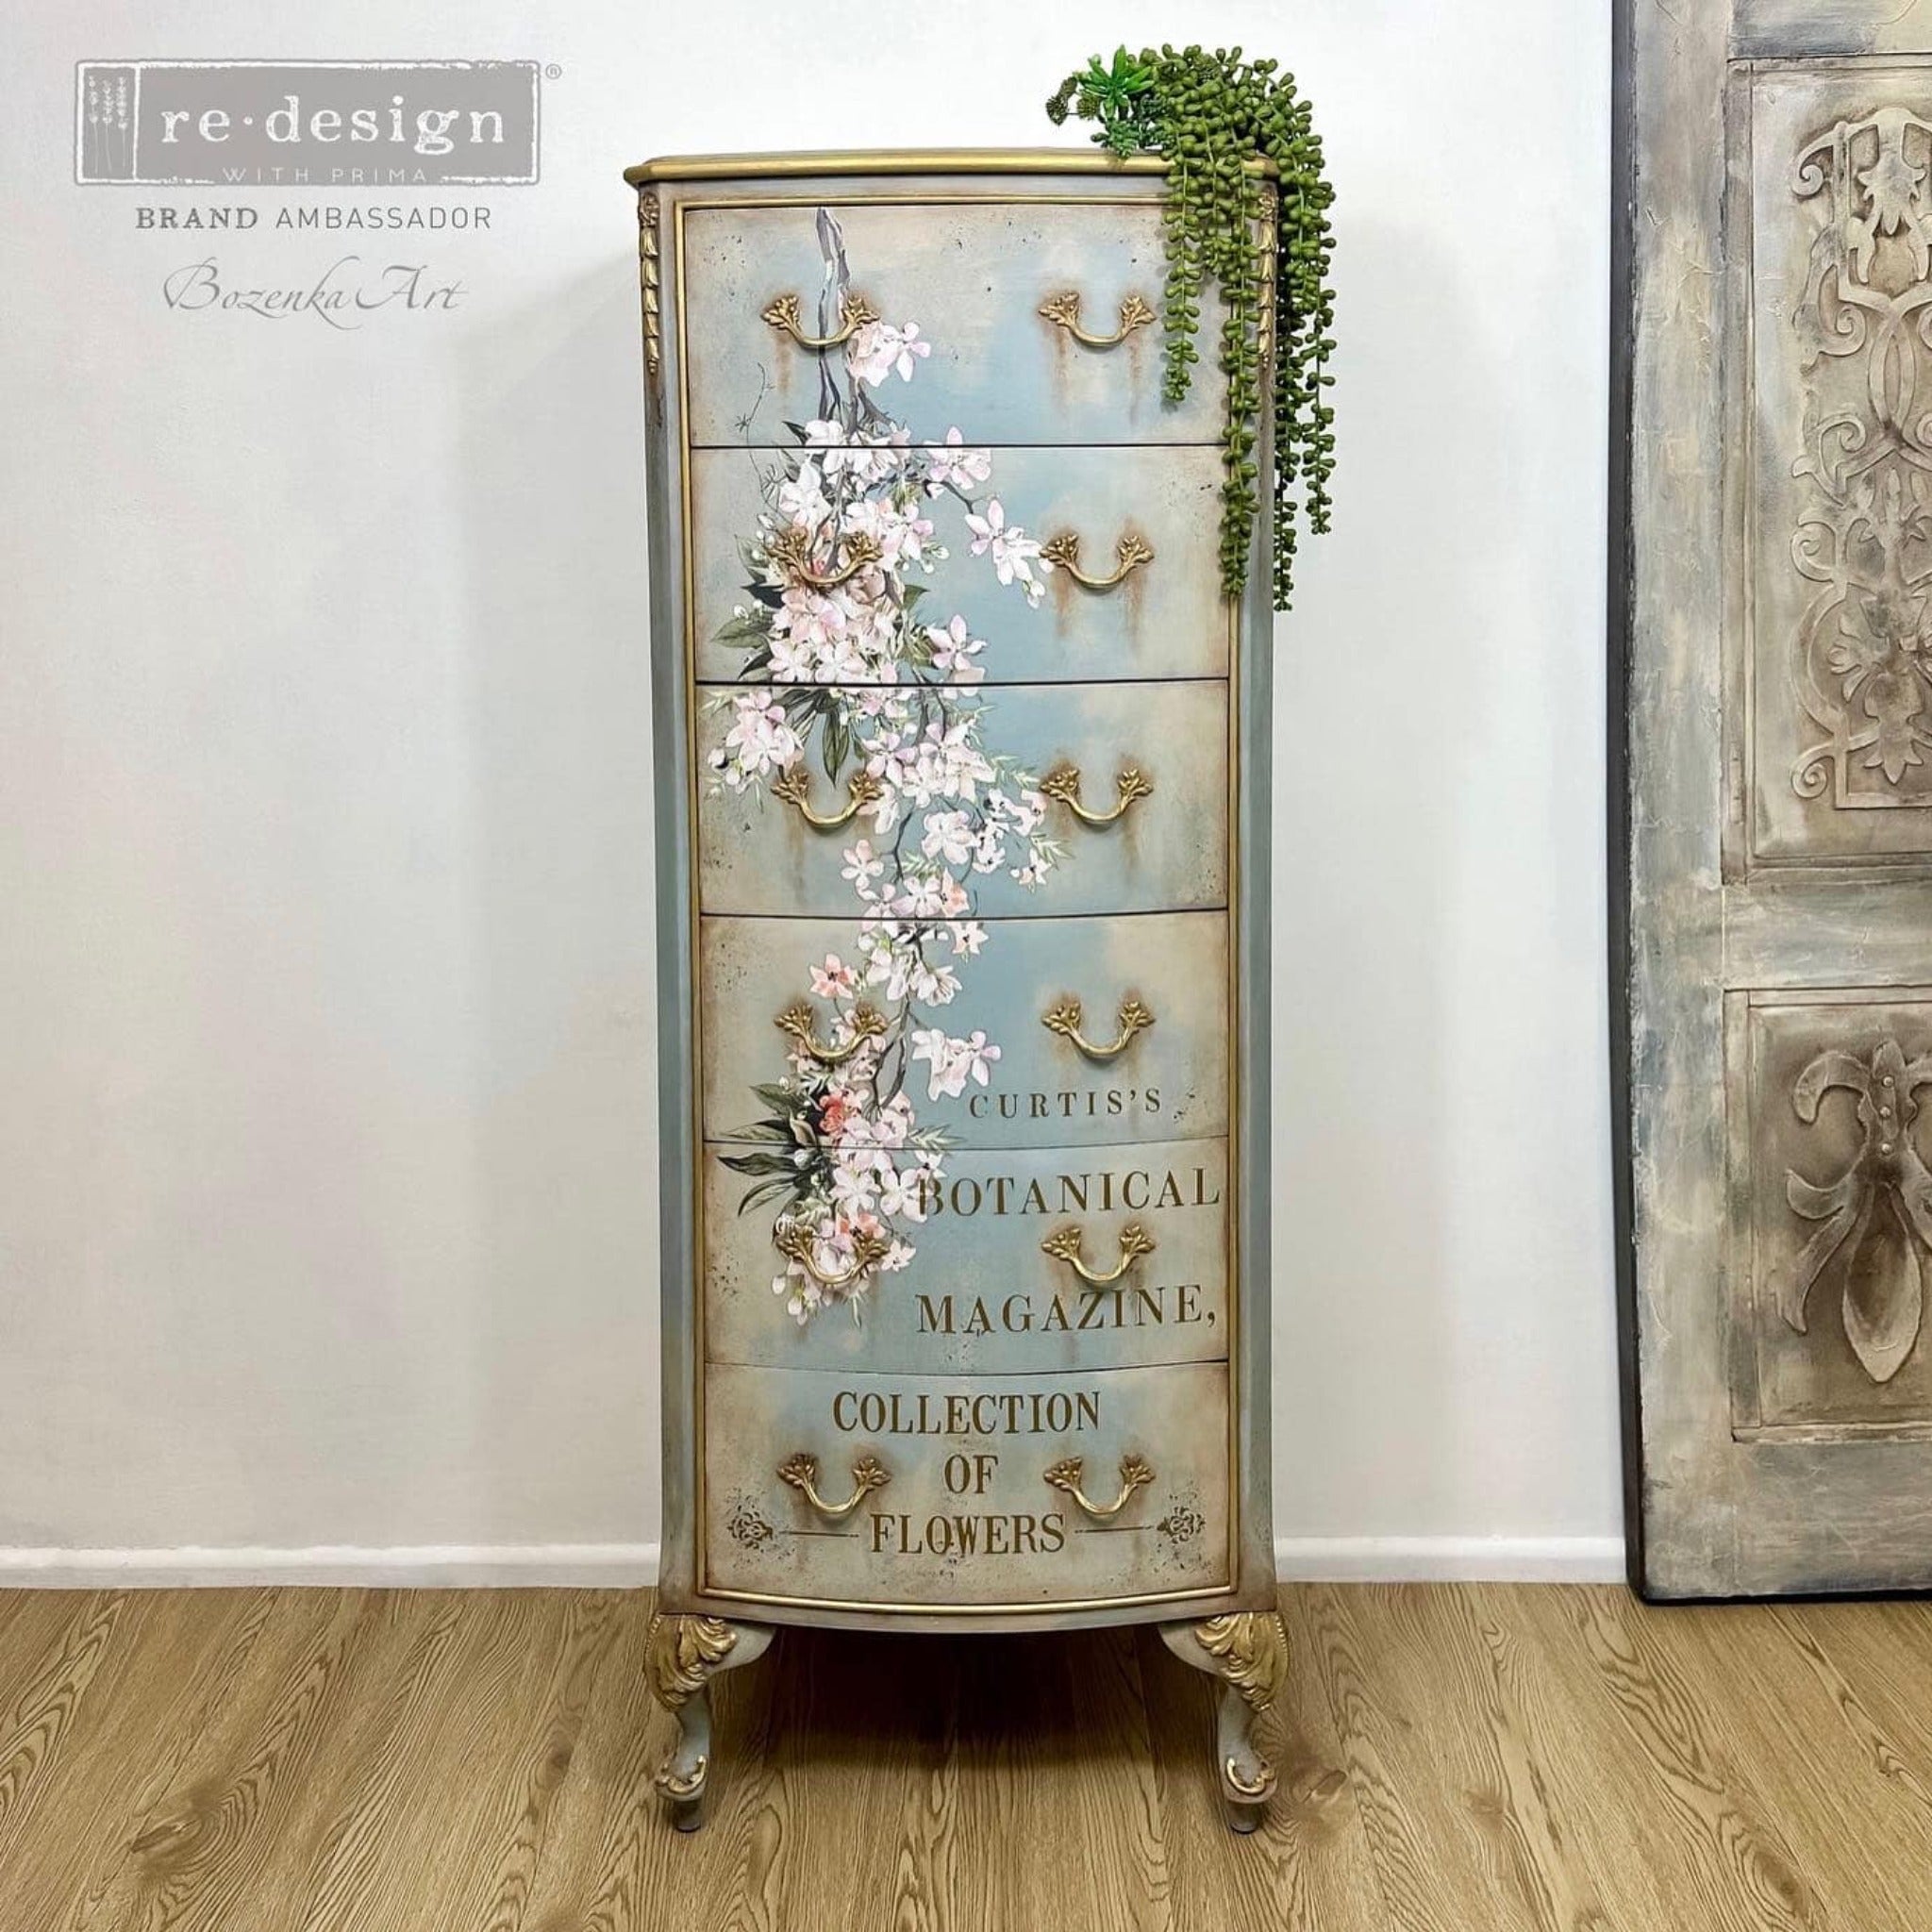 A vintage lingerie 6-drawer dresser refurbished by Bozenka Art is painted a faux patina green and features ReDesign with Prima's Blossom Botanica on its drawers.